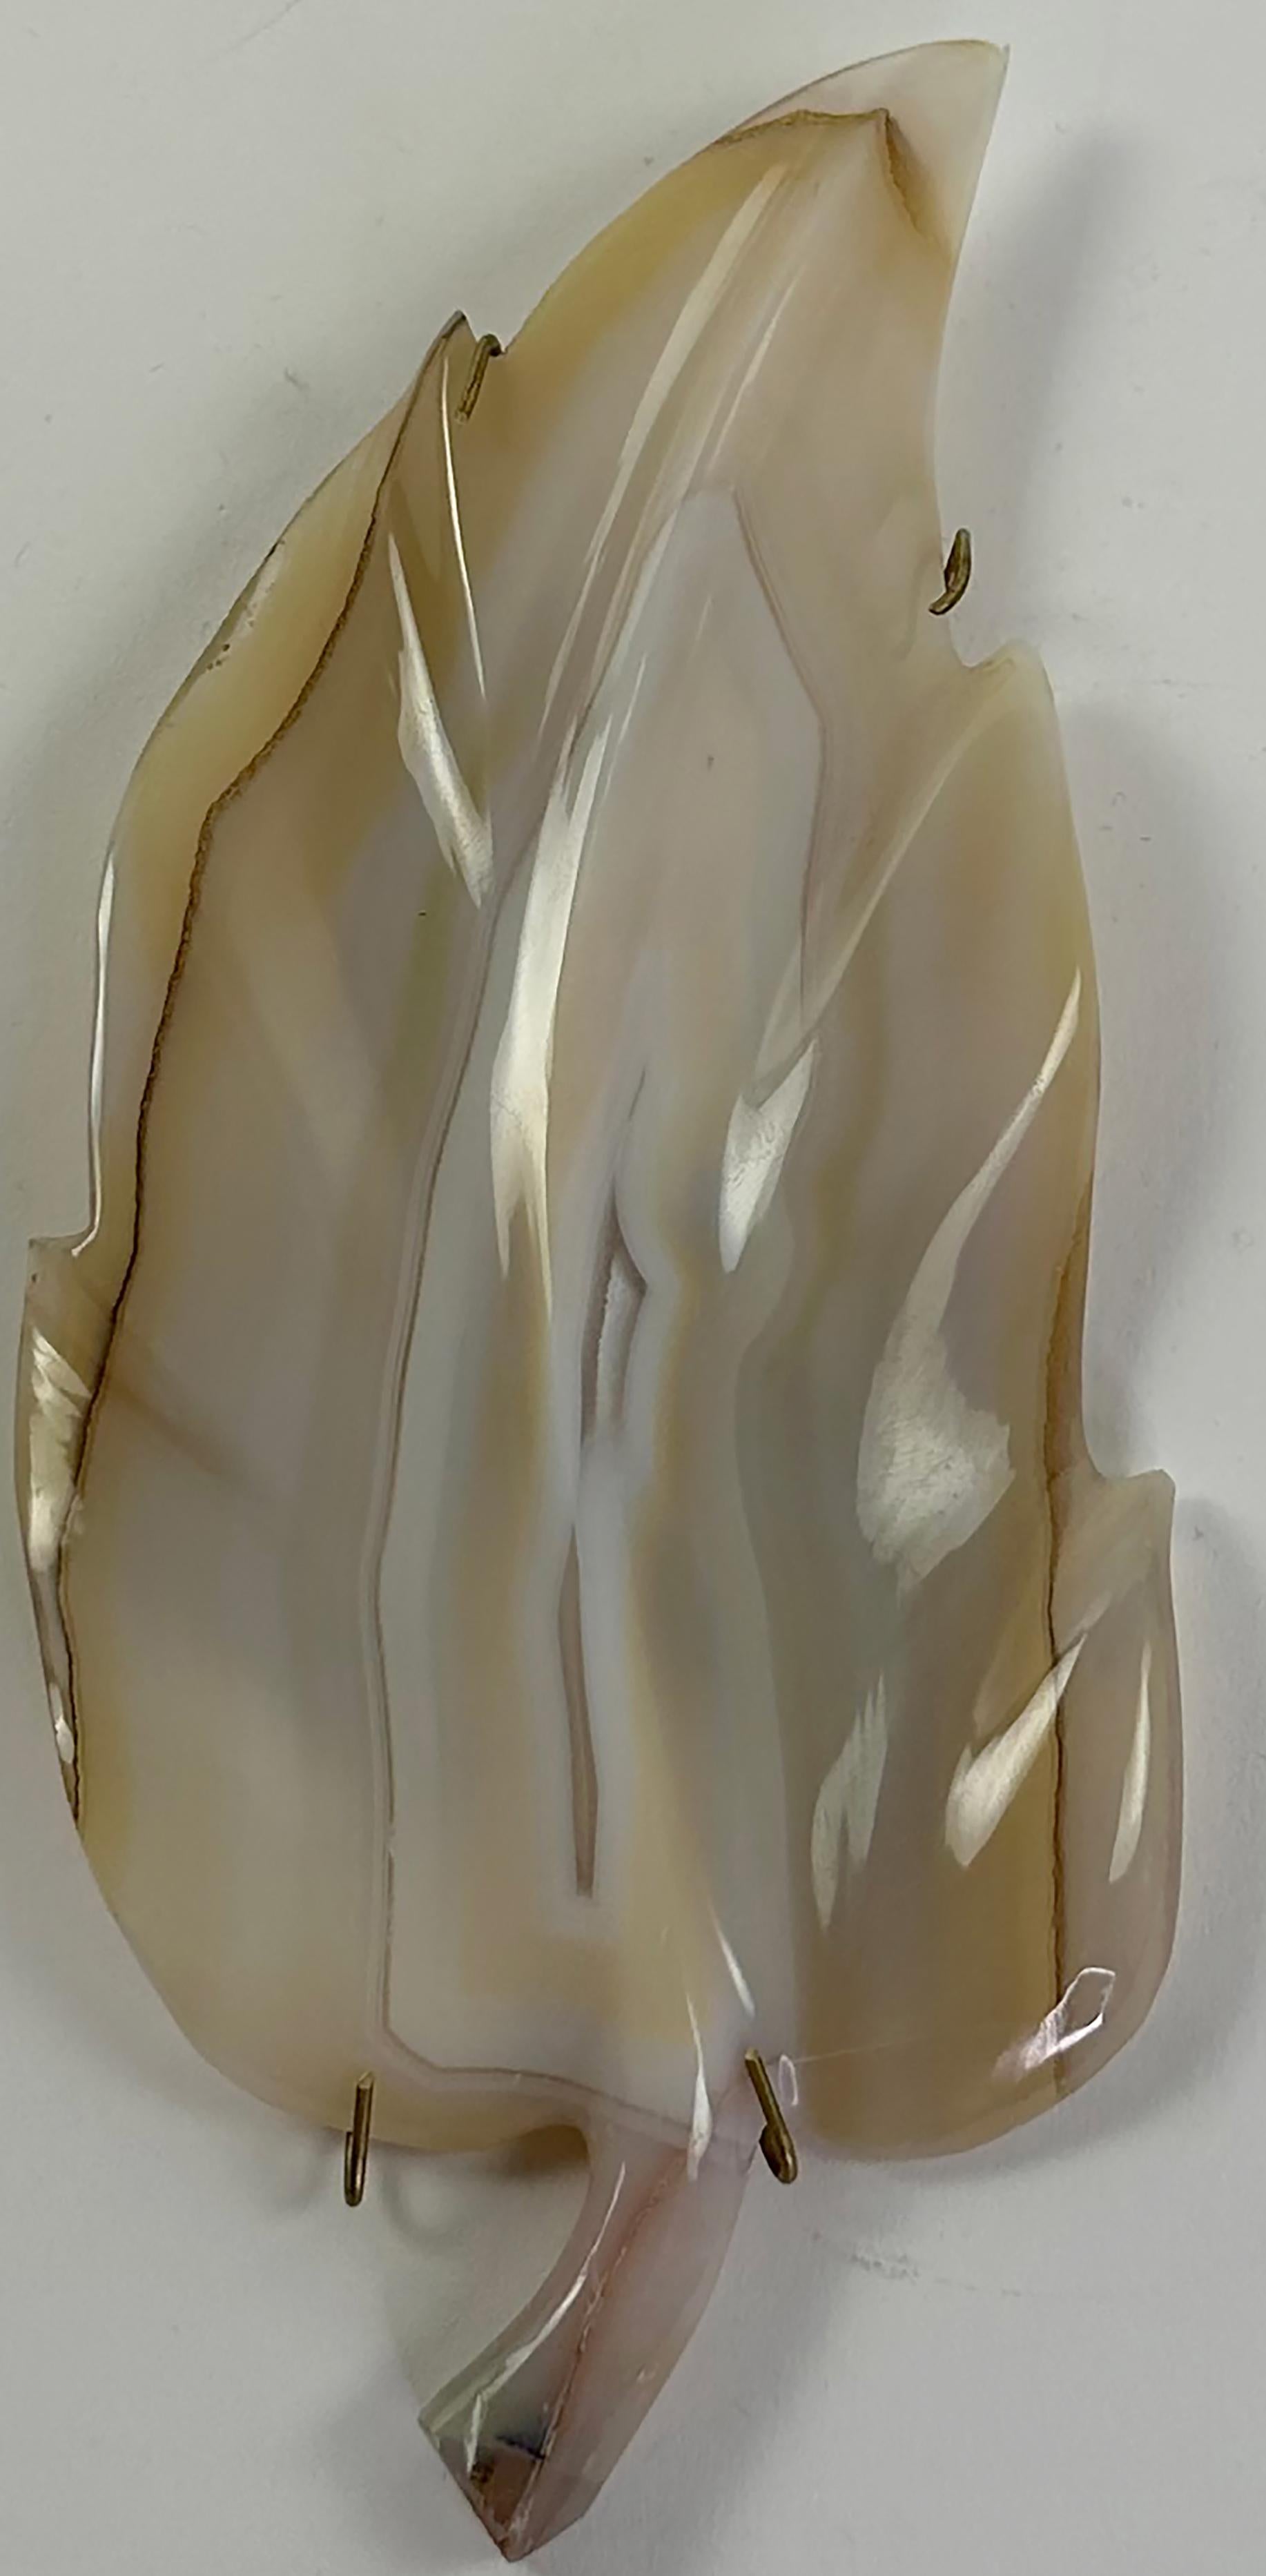 An intriguing custom carved and polished sculptural leaf. Made from agate in a pearl white color with a few light gray and brown highlights. Thin brown lines are set on both sides of the leaf.

In very good condition. Some gentle wear and aging